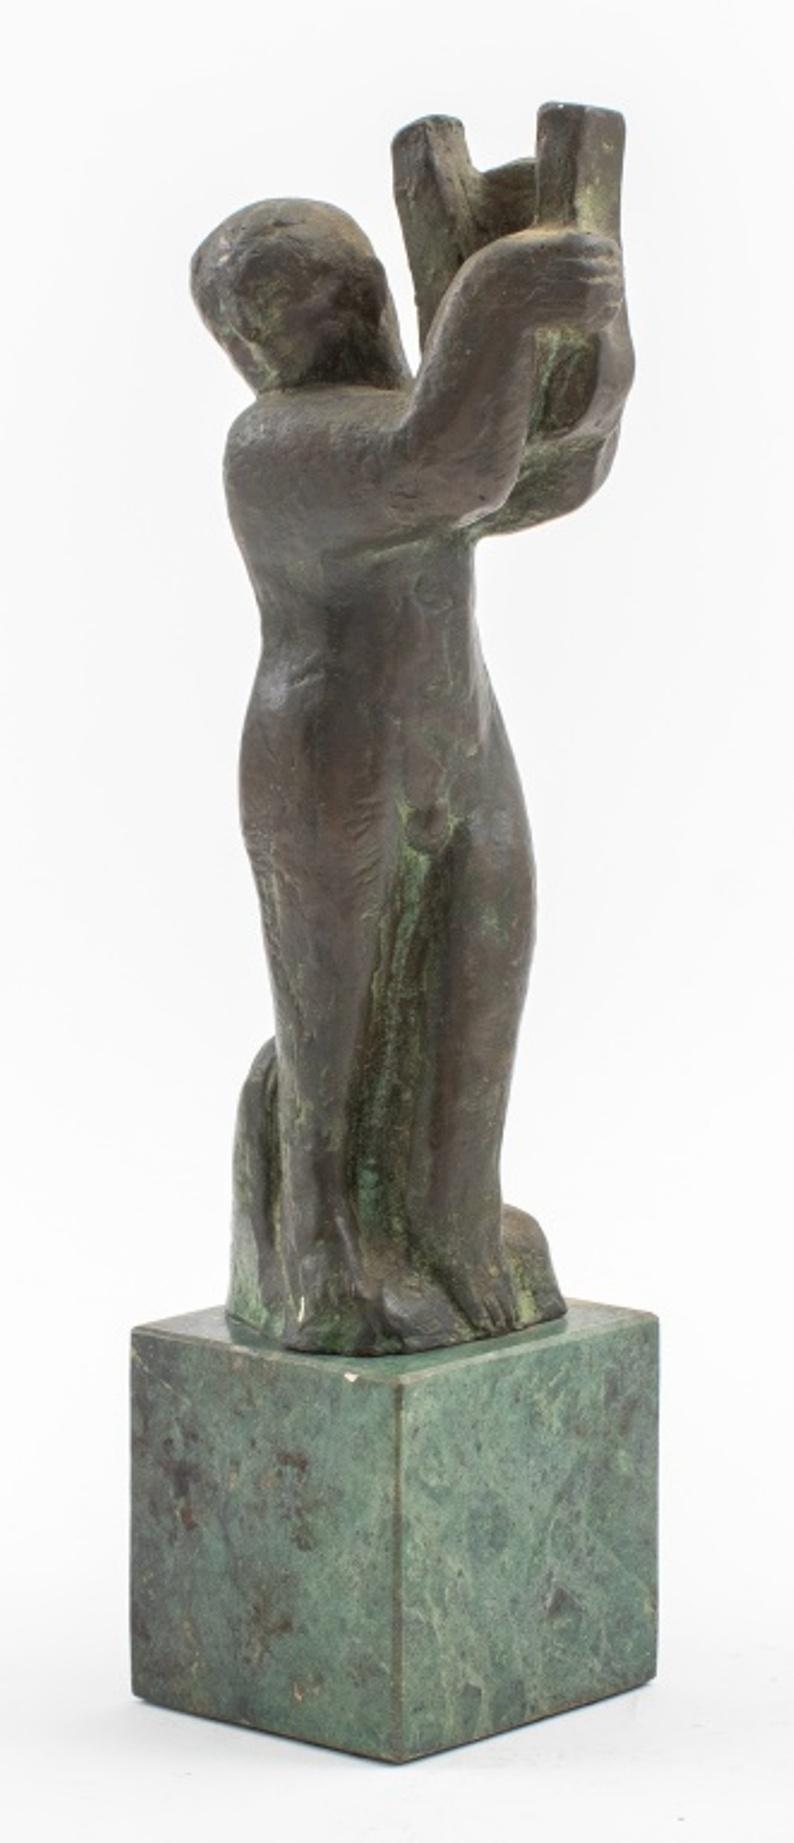 Attributed to John McDonnell (American, b. 1880) verdigris patinated bronze sculpture depicting a standing nude male harp player, signed 